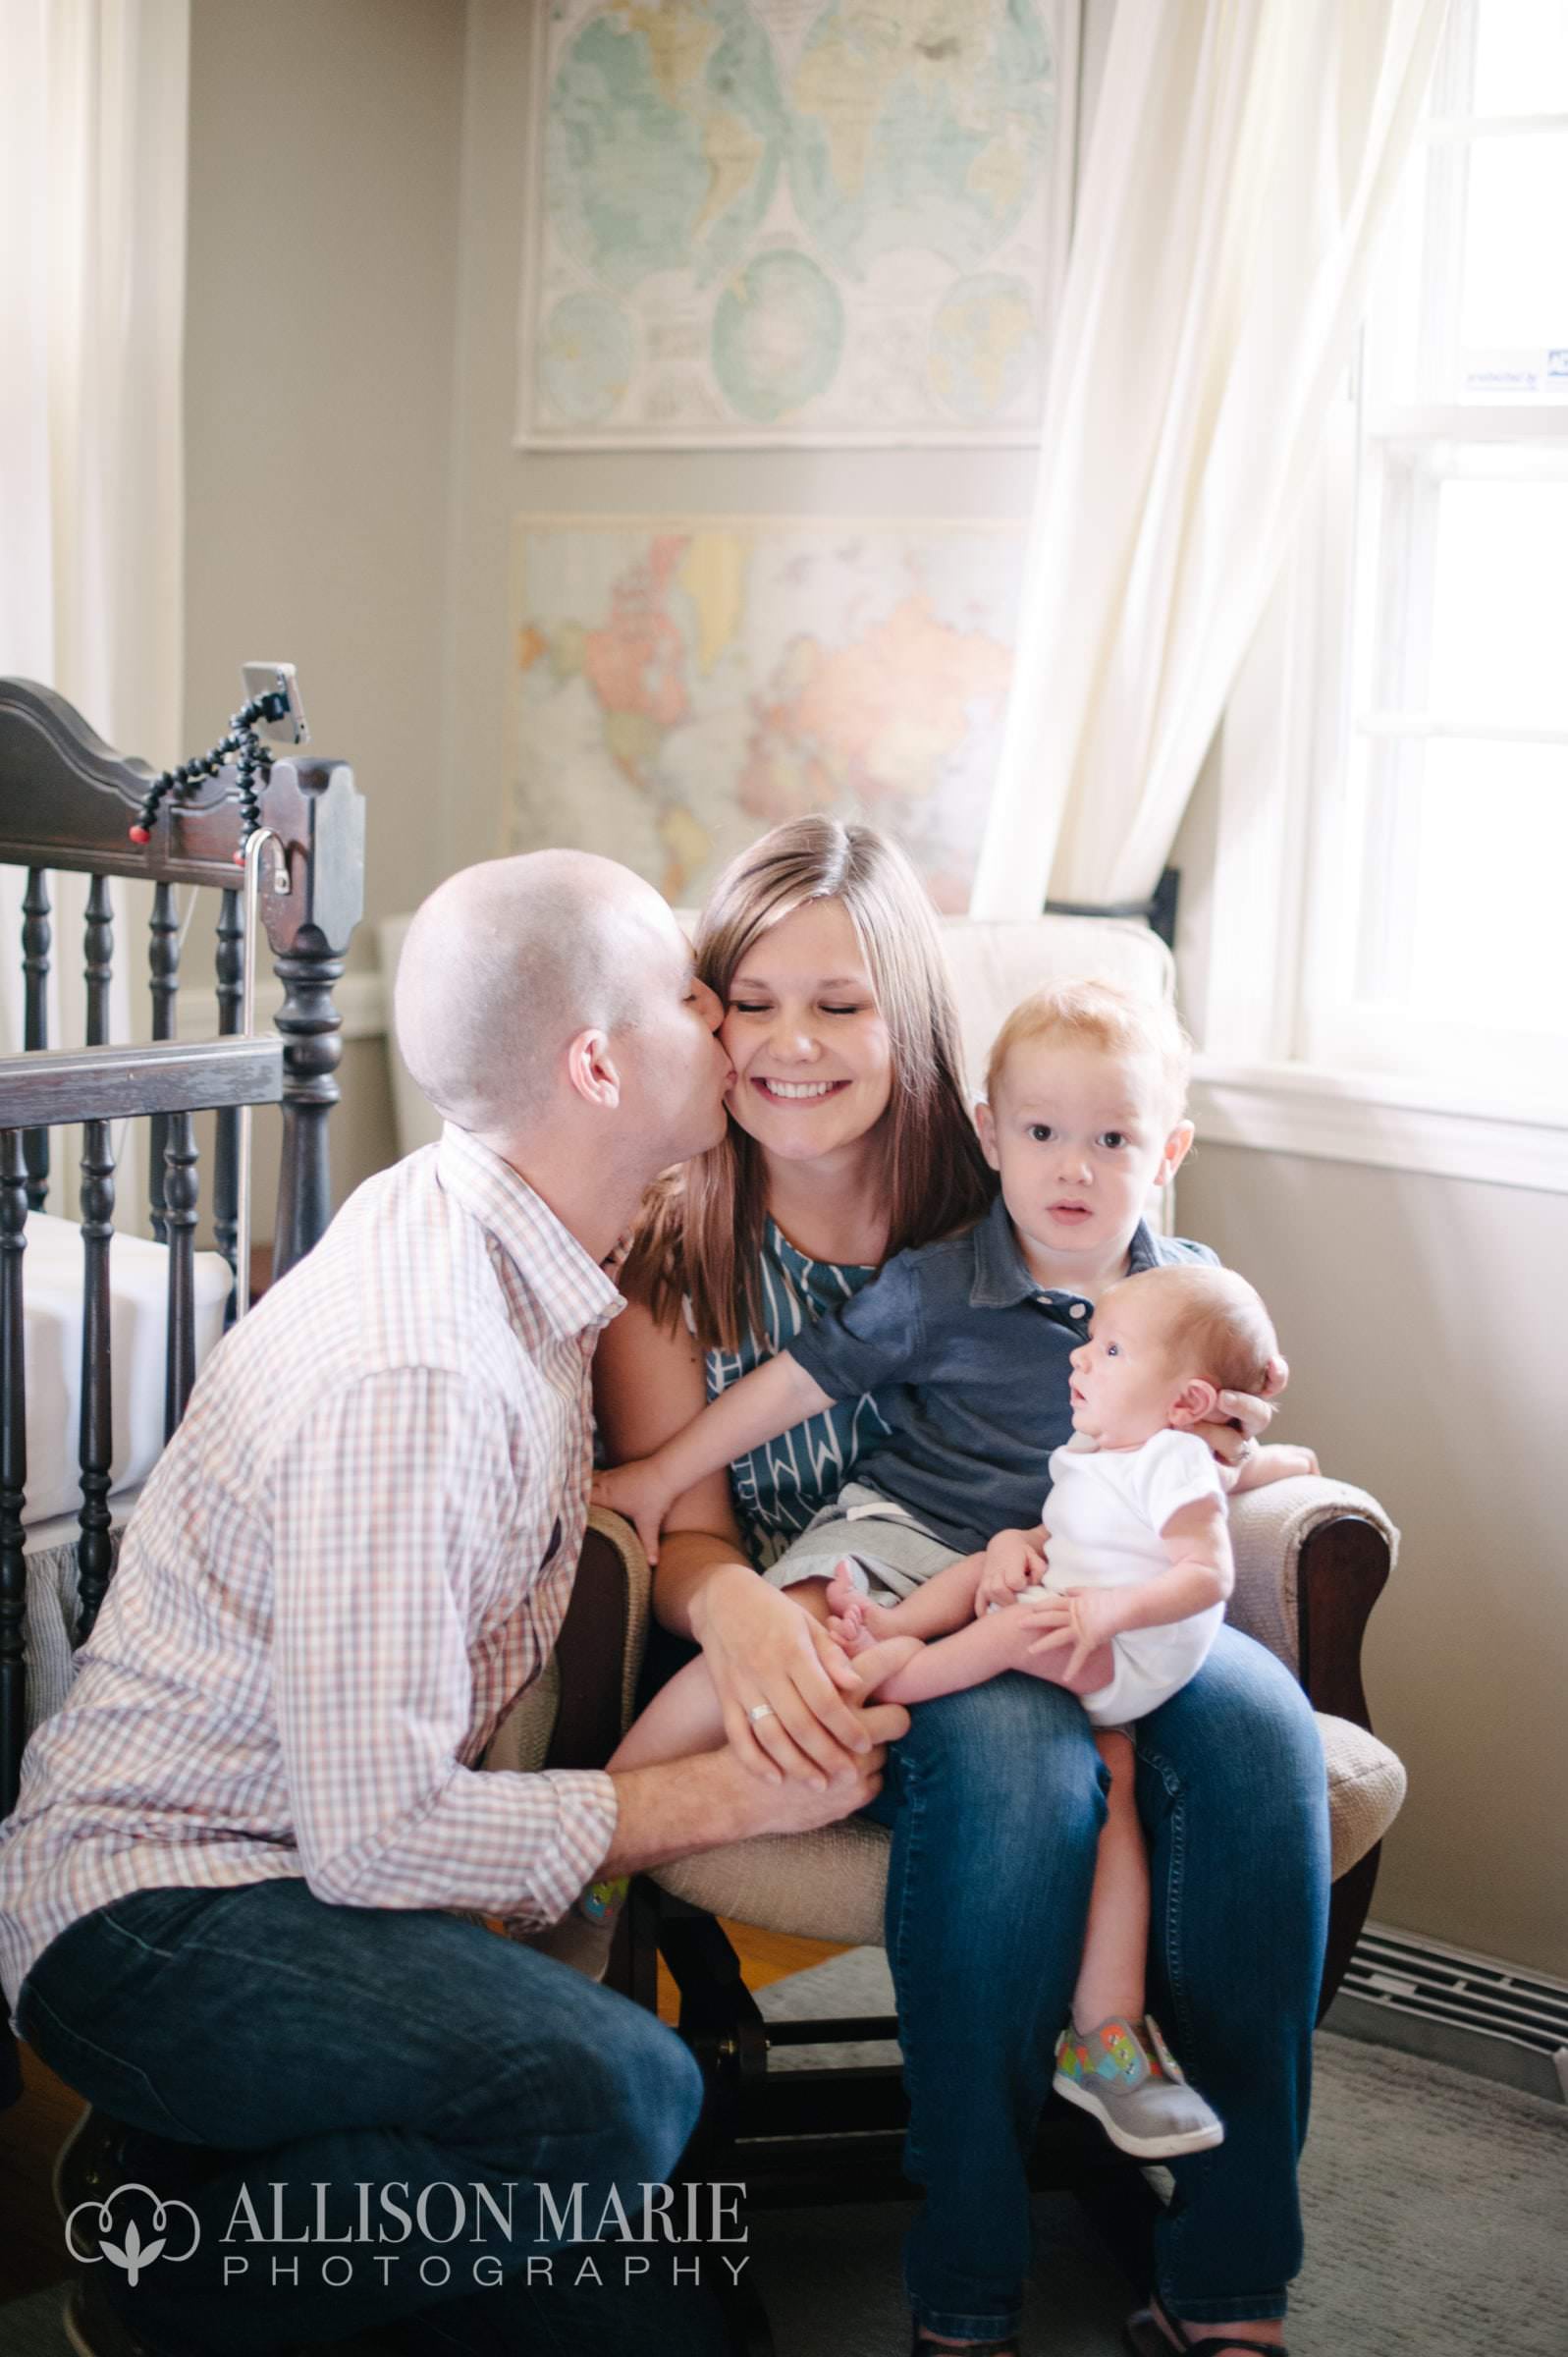 Favorite Family Images 2014, Allison Marie Photography02